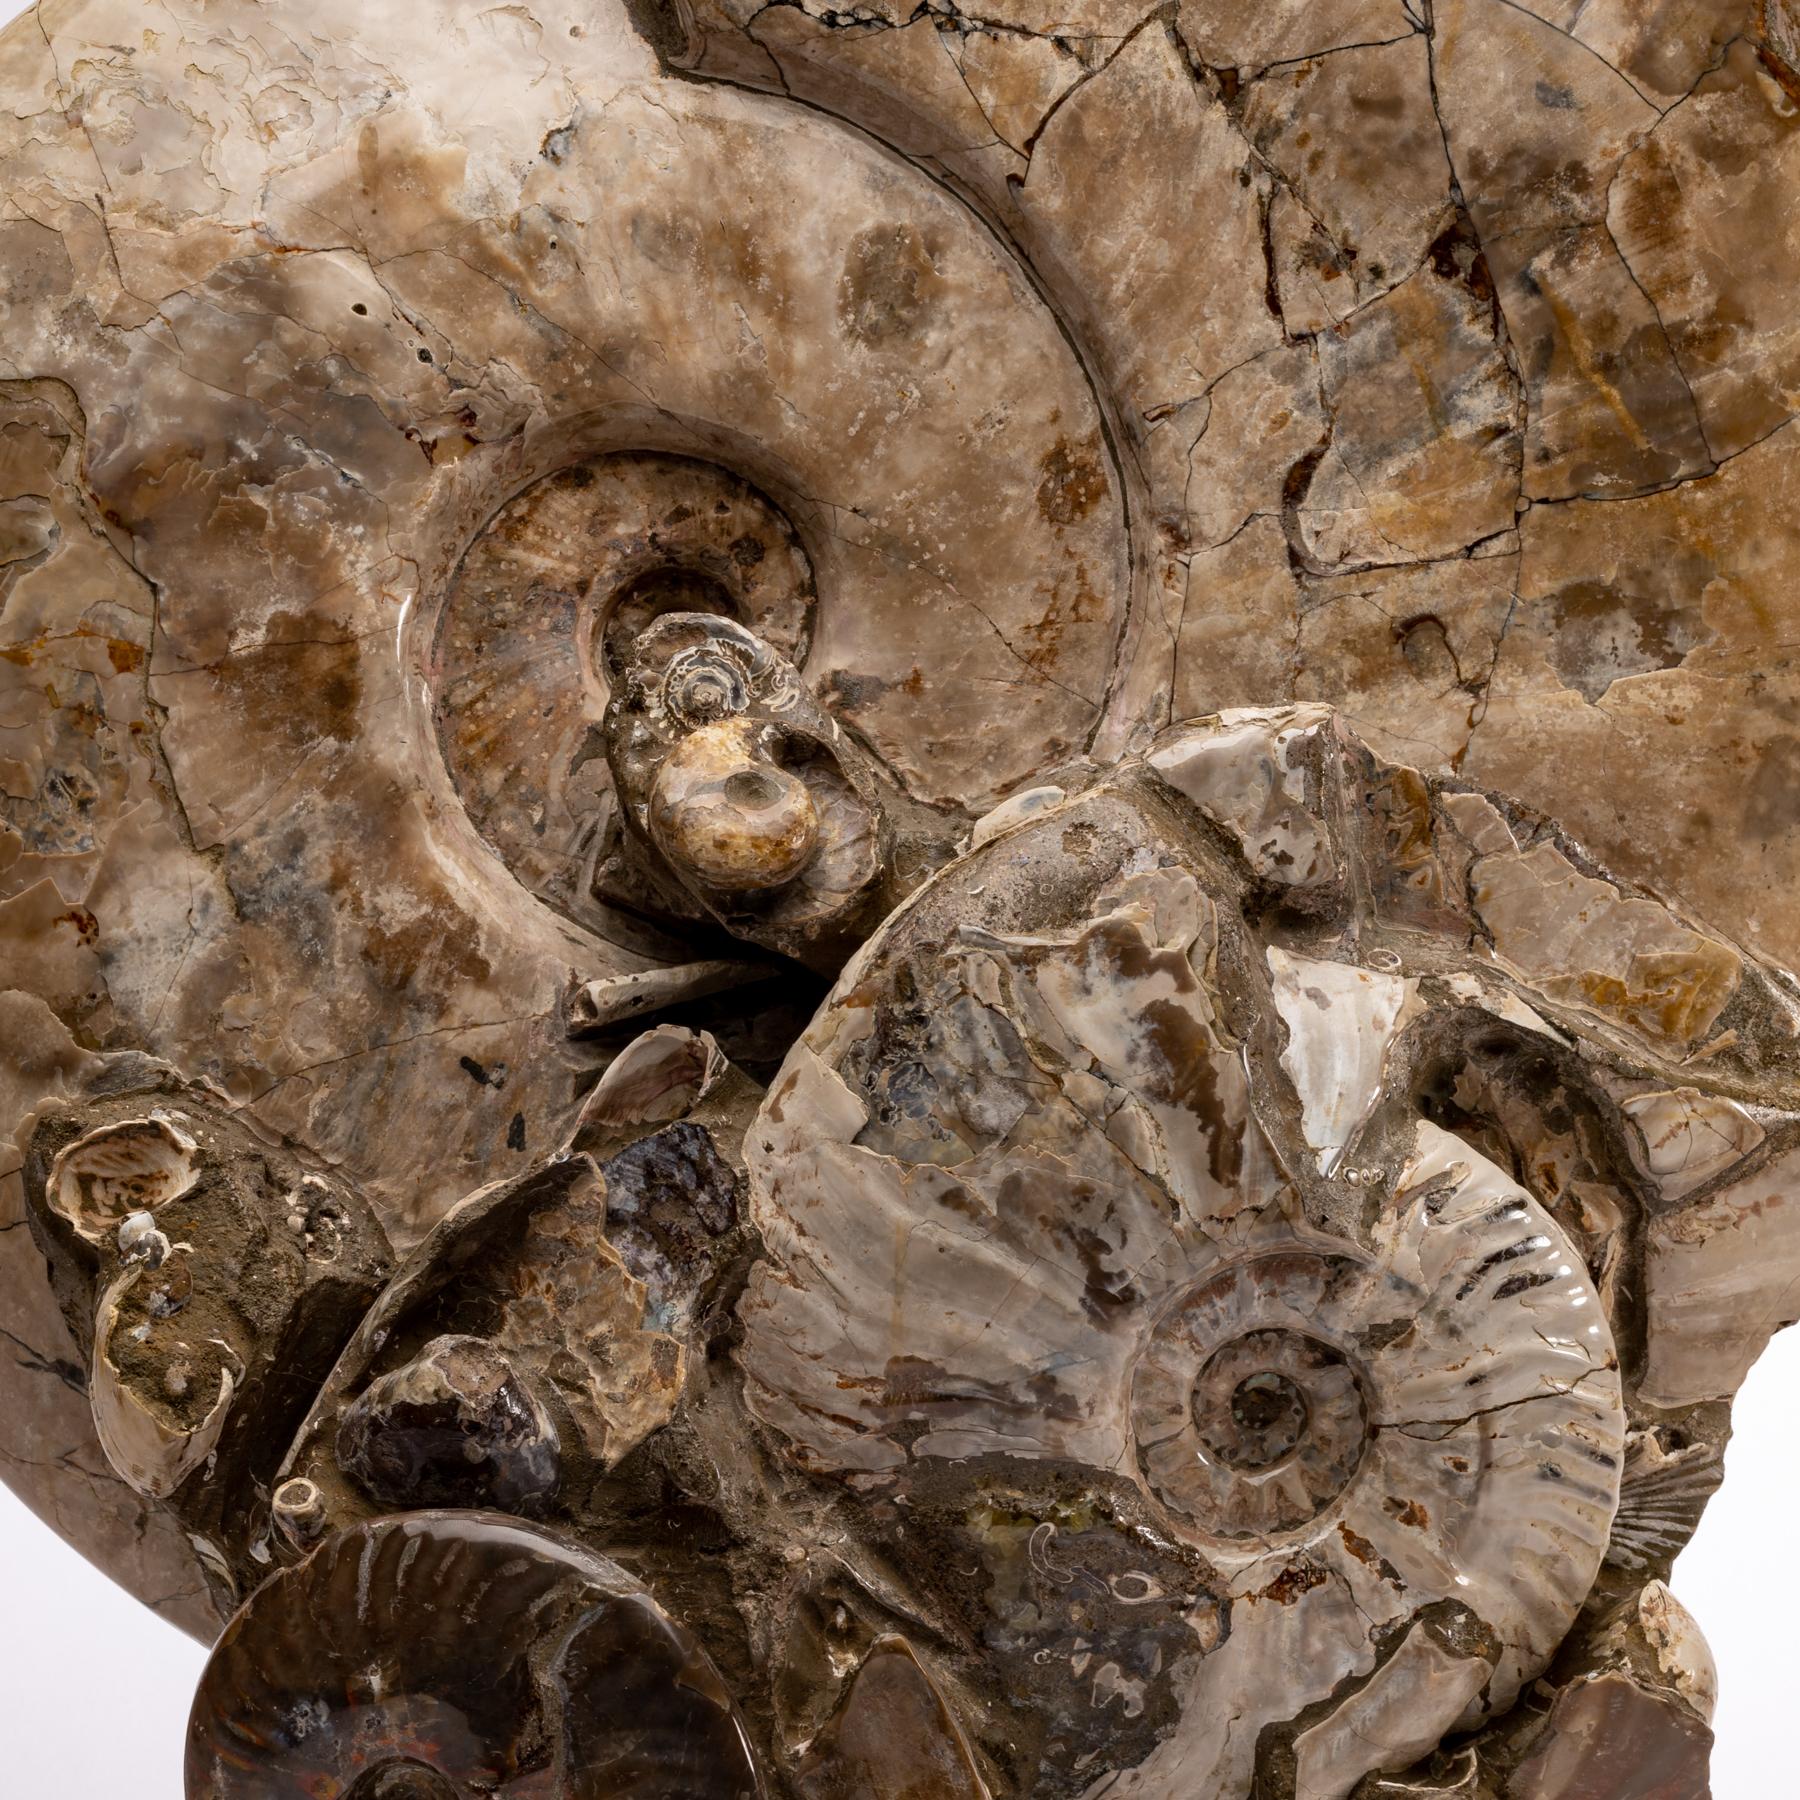 Free Standing Fossil Ammonite Cluster from Madagascar, Cretaceous Period 1